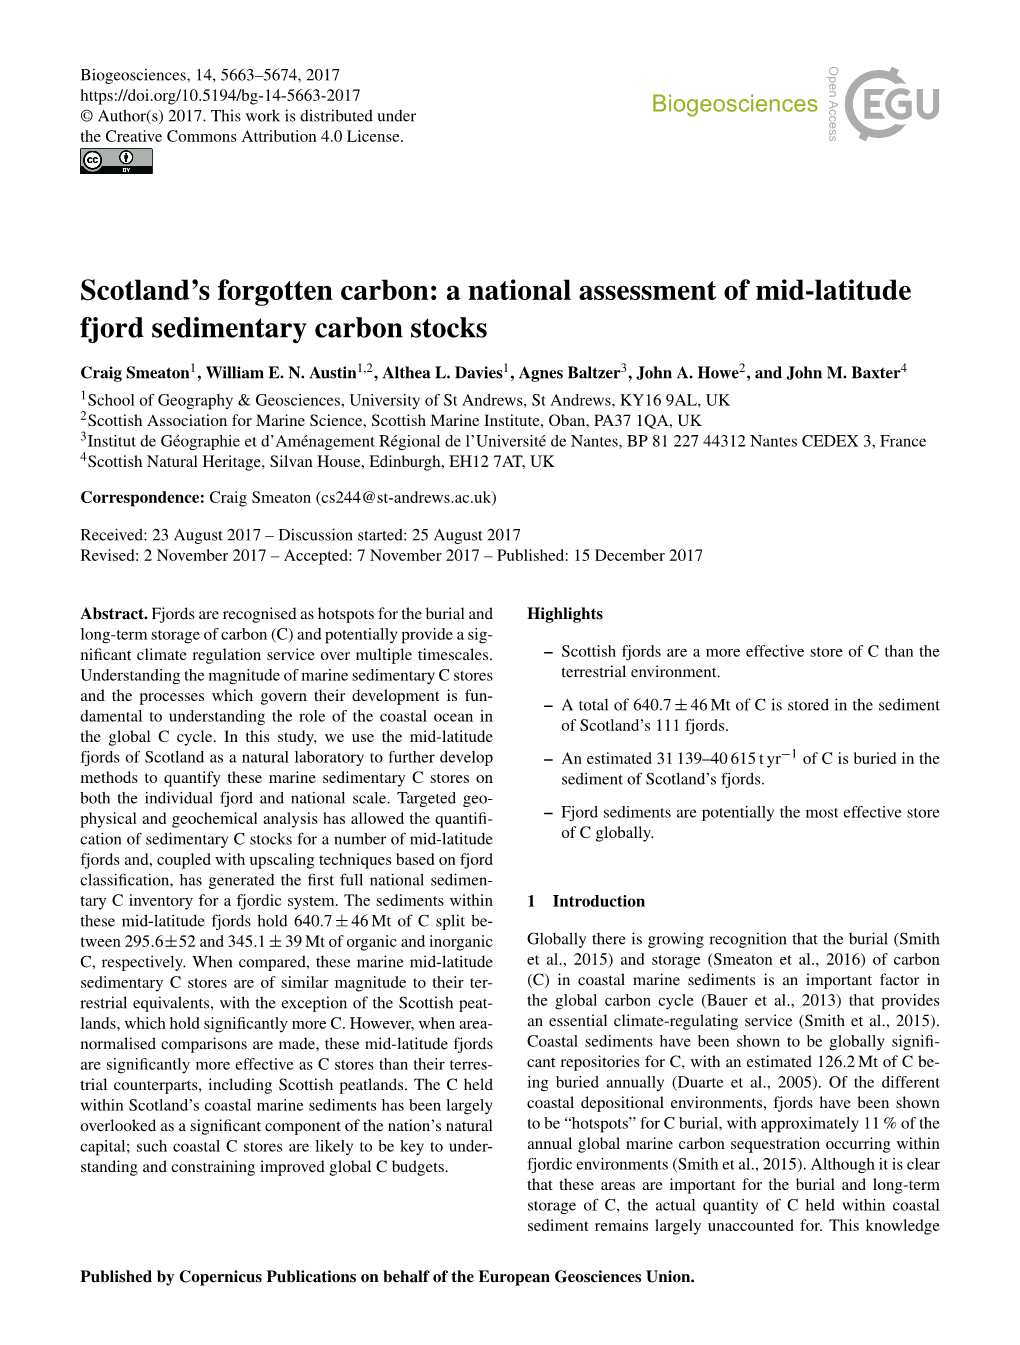 Scotland's Forgotten Carbon: a National Assessment of Mid-Latitude Fjord